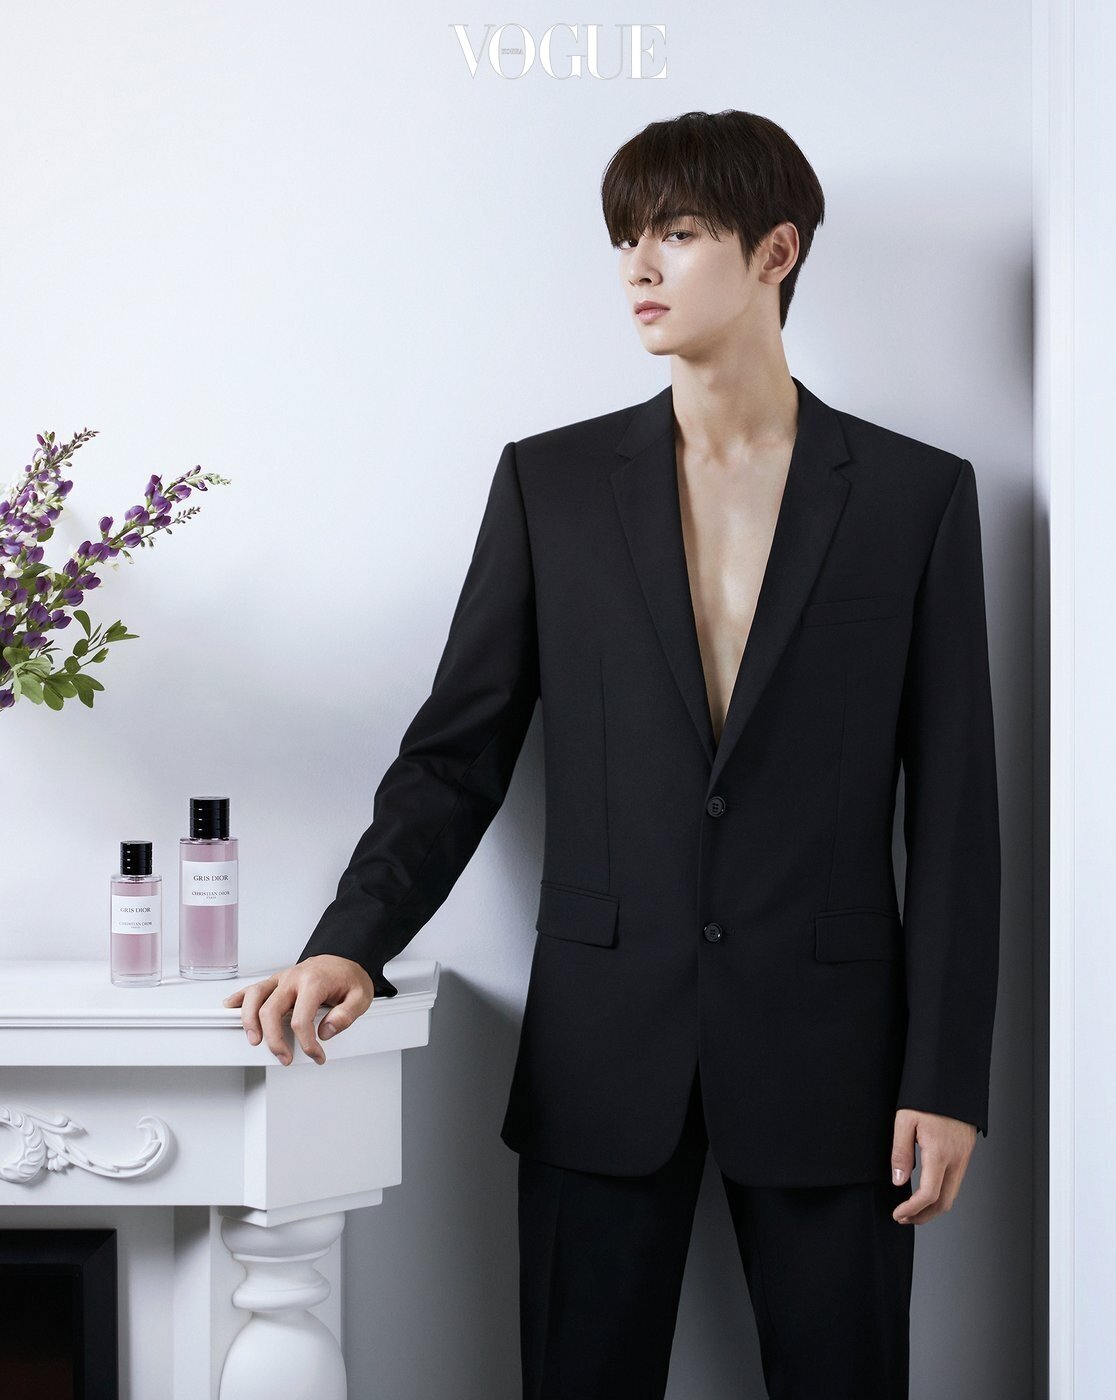 8 male Korean stars ruling the beauty world: from Astro's Cha Eun-woo's  Dior Beauty gig and Got7's Jackson Wang who reps Armani and Mac, to Exo's  Kai in YSL make-up and Lee